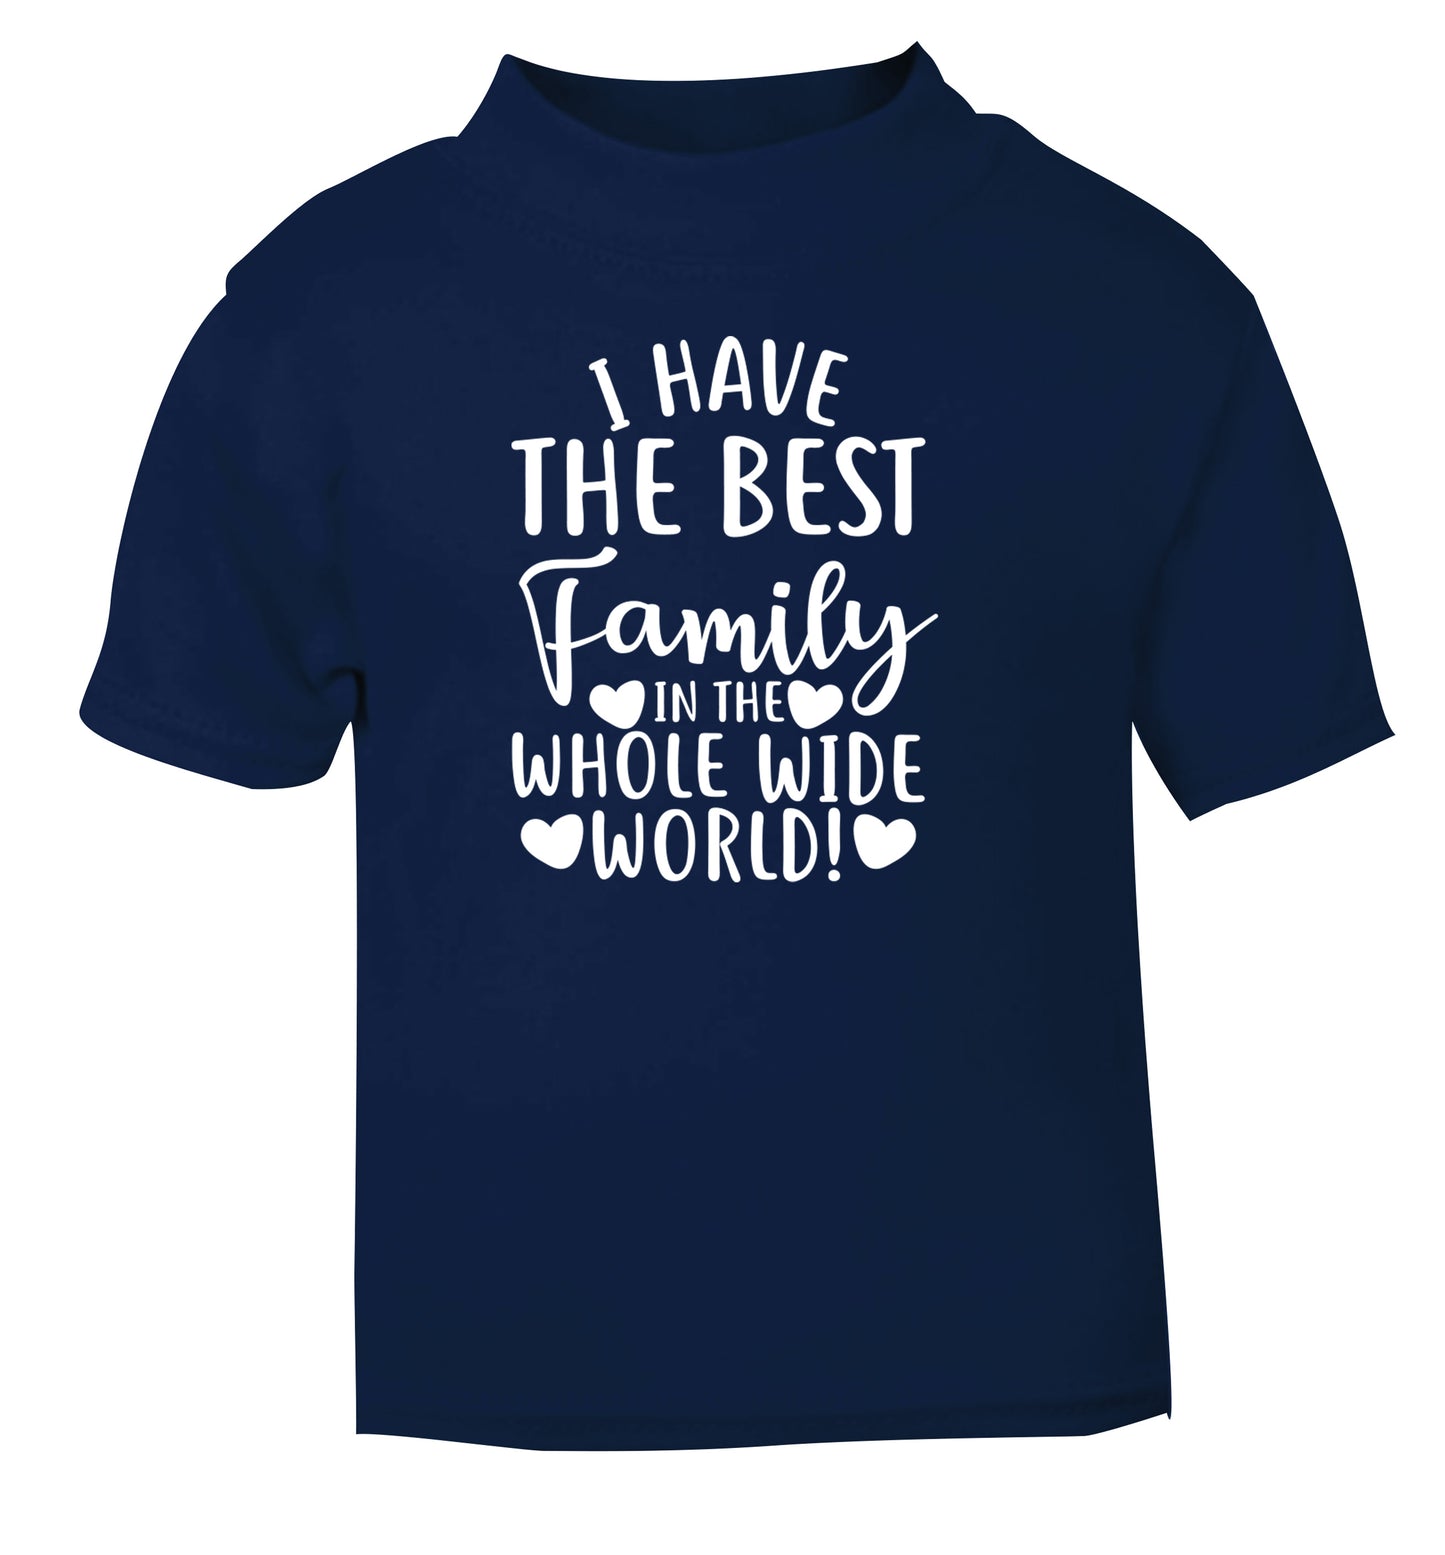 I have the best family in the whole wide world! navy Baby Toddler Tshirt 2 Years